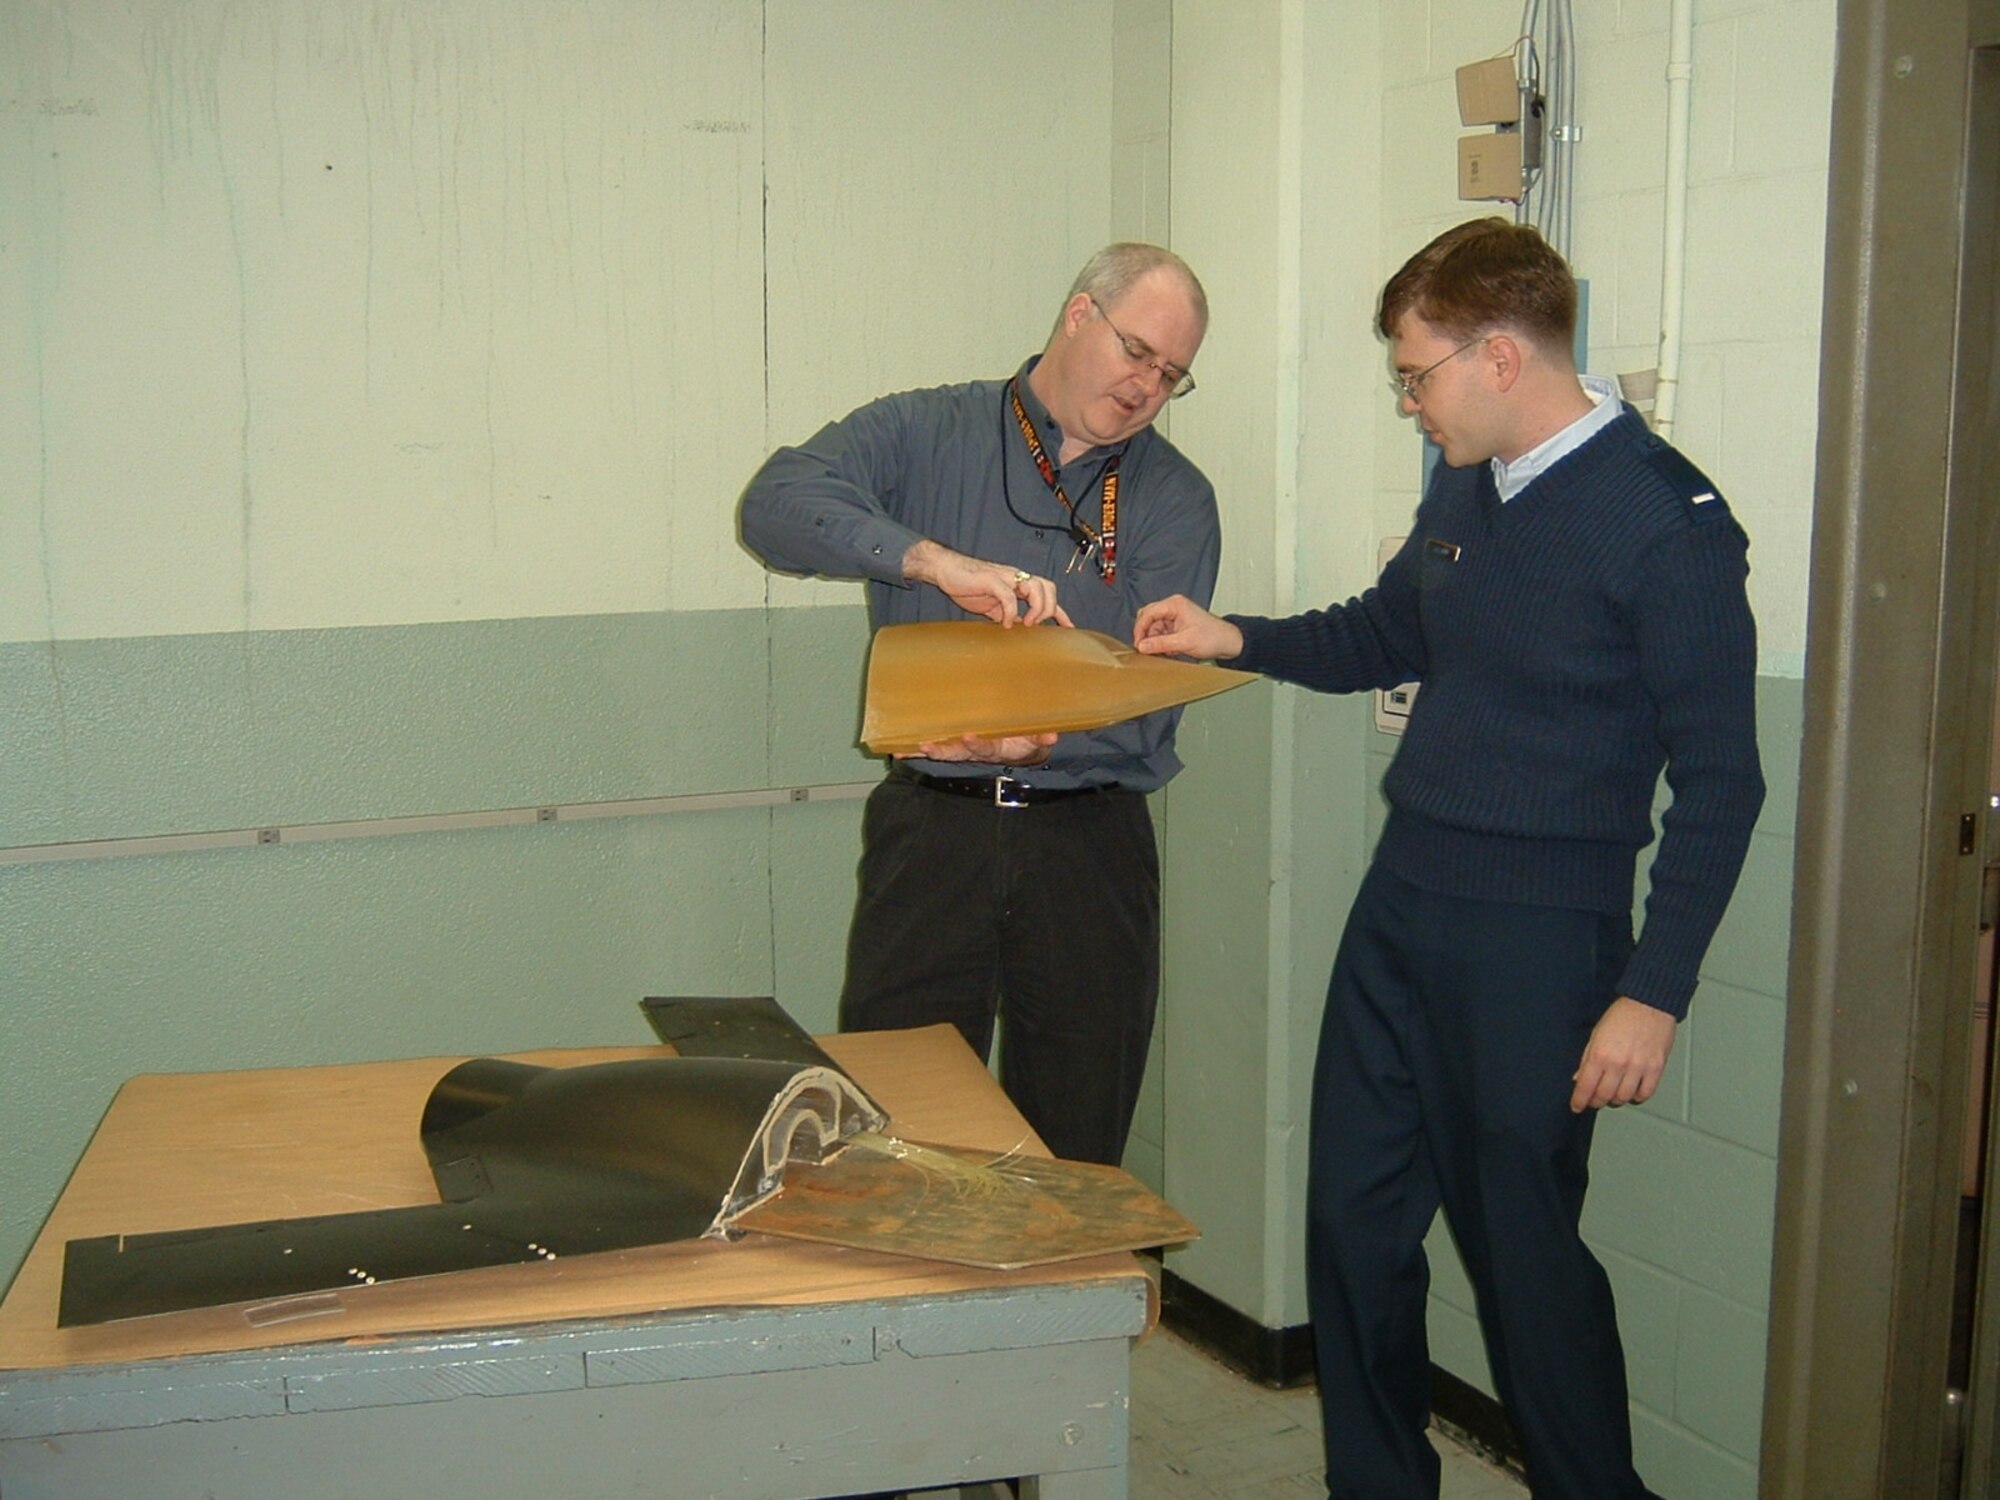 Dr. Charles Tyler (left) and 1st Lt. Erik Saladin examine an X-45A Unmanned Combat Air Vehicle model created using rapid prototyping technology.  (Air Force photo by Melissa Withrow)

